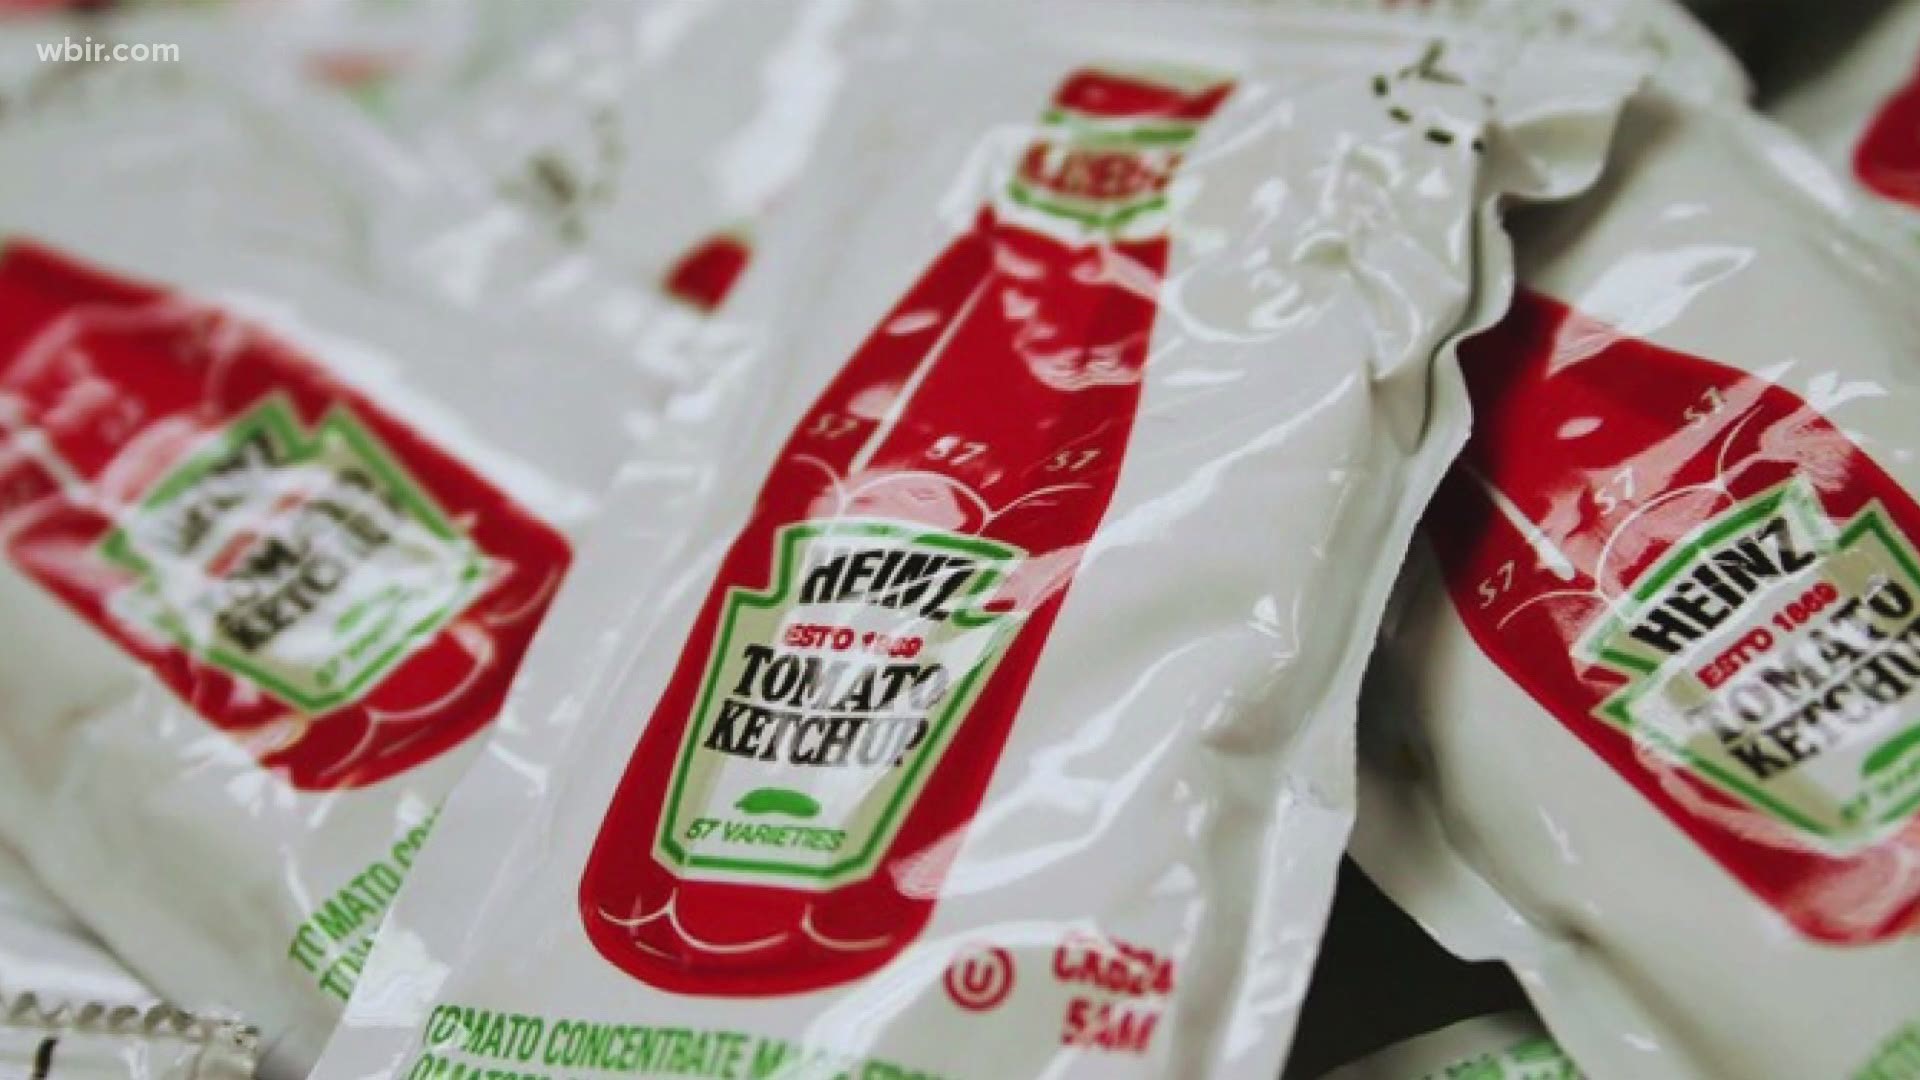 Some East Tennessee school districts are having a hard time getting a popular condiment - ketchup.